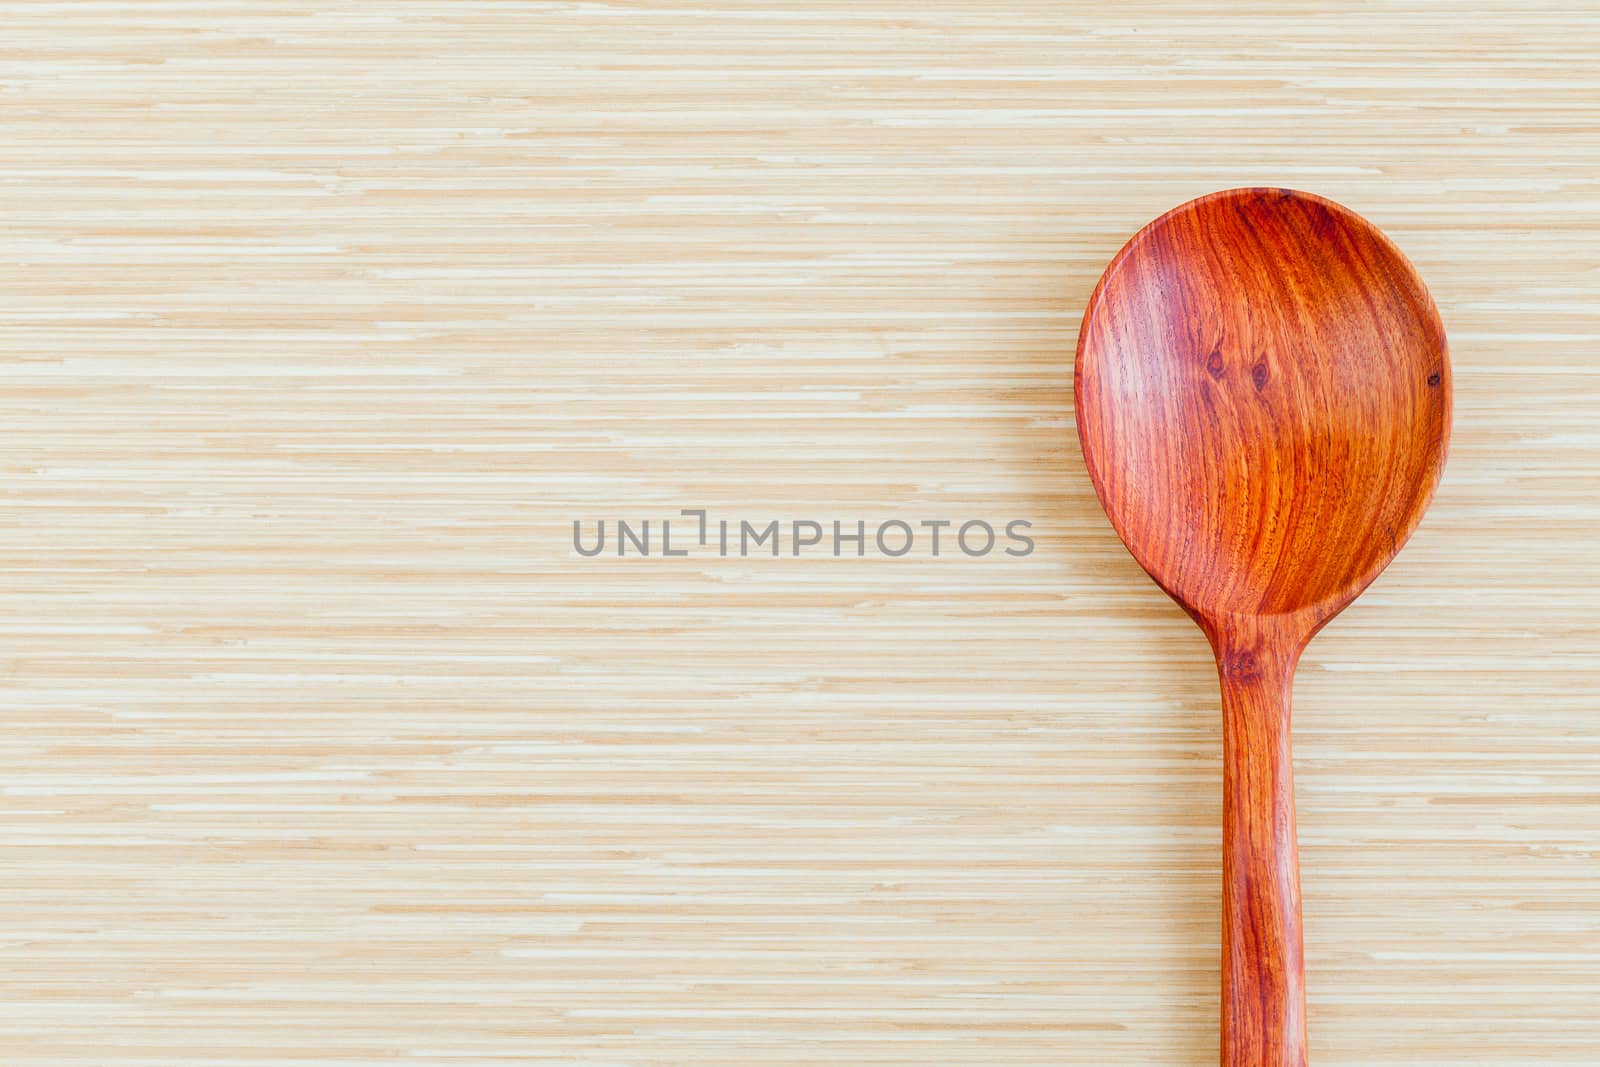 Wooden spoon on wooden background - concept for food and kitchen with copy space.